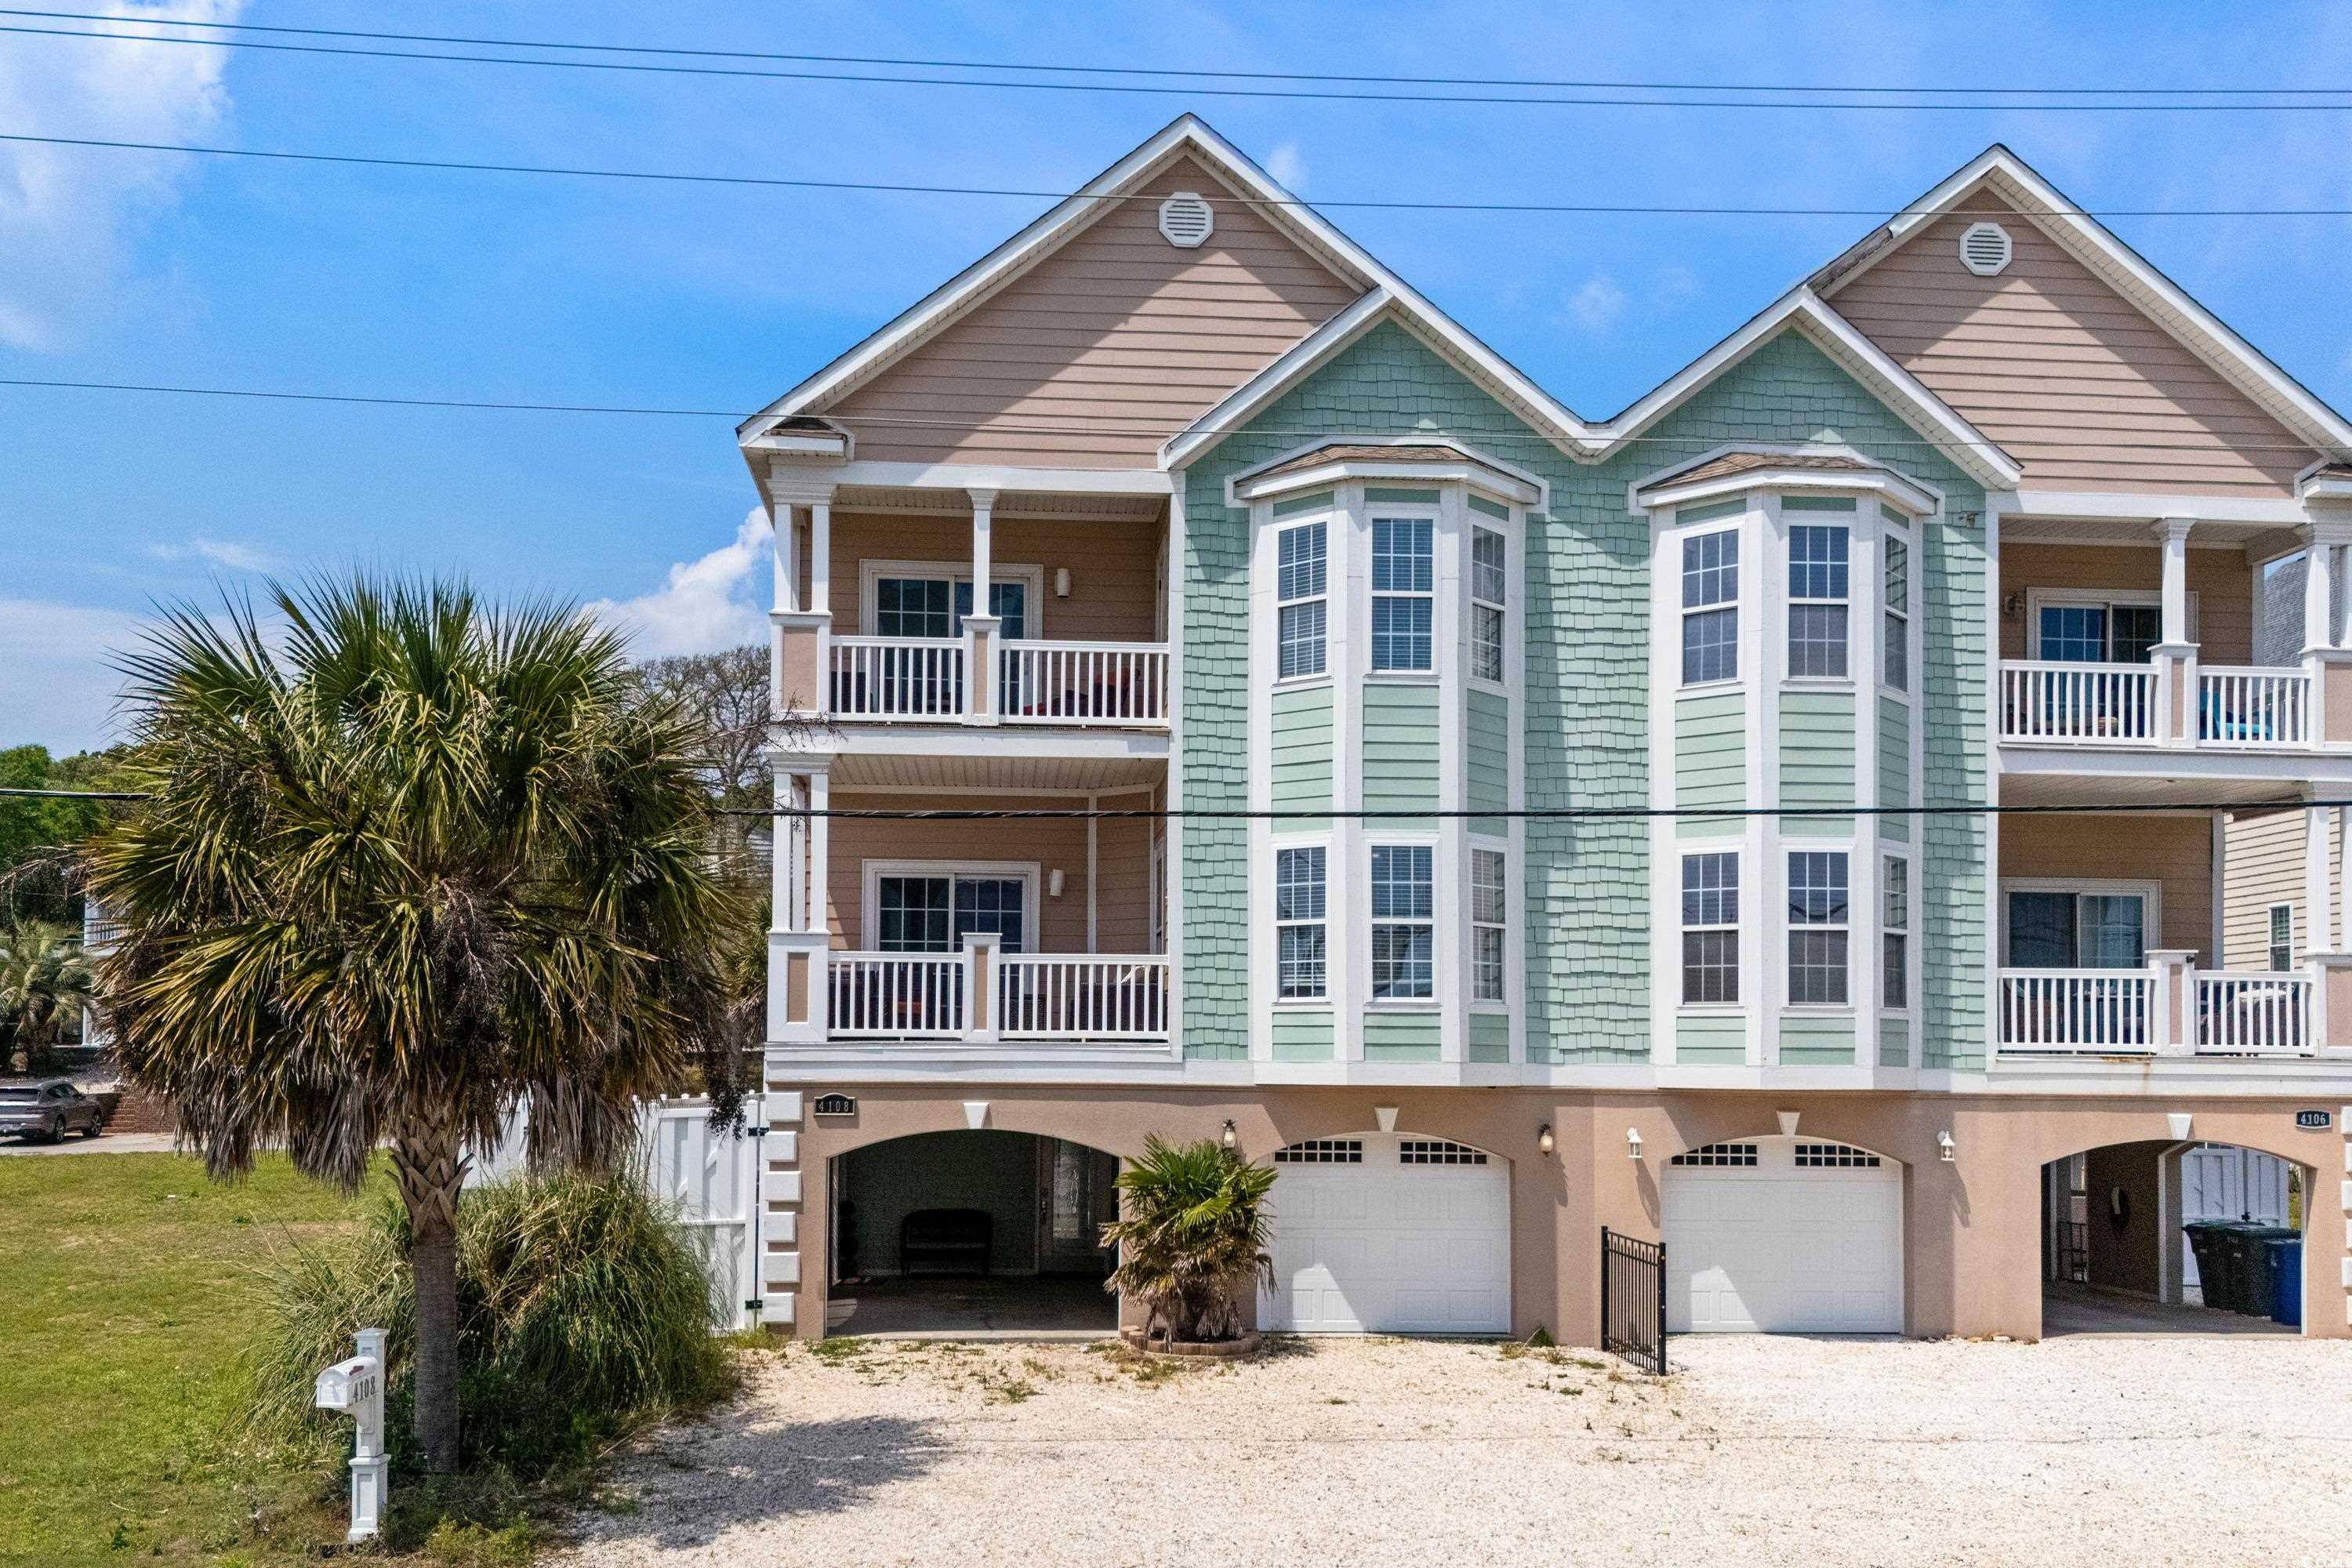 amazing opportunity to own this income producing or second vacation semi detached home with no hoa in the heart of north myrtle beach! this 5 bedroom 4 1/2 bathroom features a private garage and private pool with a beautiful & private backyard! approximately +/- 4000 heated square feet of luxury space for this vacation spot walking distance to the beach! kitchen features granite countertops with lots of cabinet space with this open concept floor plan for entertaining and stainless steel appliances. multiple balconies to relax and watch the sunset on, enjoy your coffee and hang out with family and friends. come see this property, which is a golf cart ride to everything: barefoot landing, restaurants, bars, golfing, entertainment, house of blues, the beach, ice cream, shoppes and more! your luxurious second home, residence or vacation rental awaits!